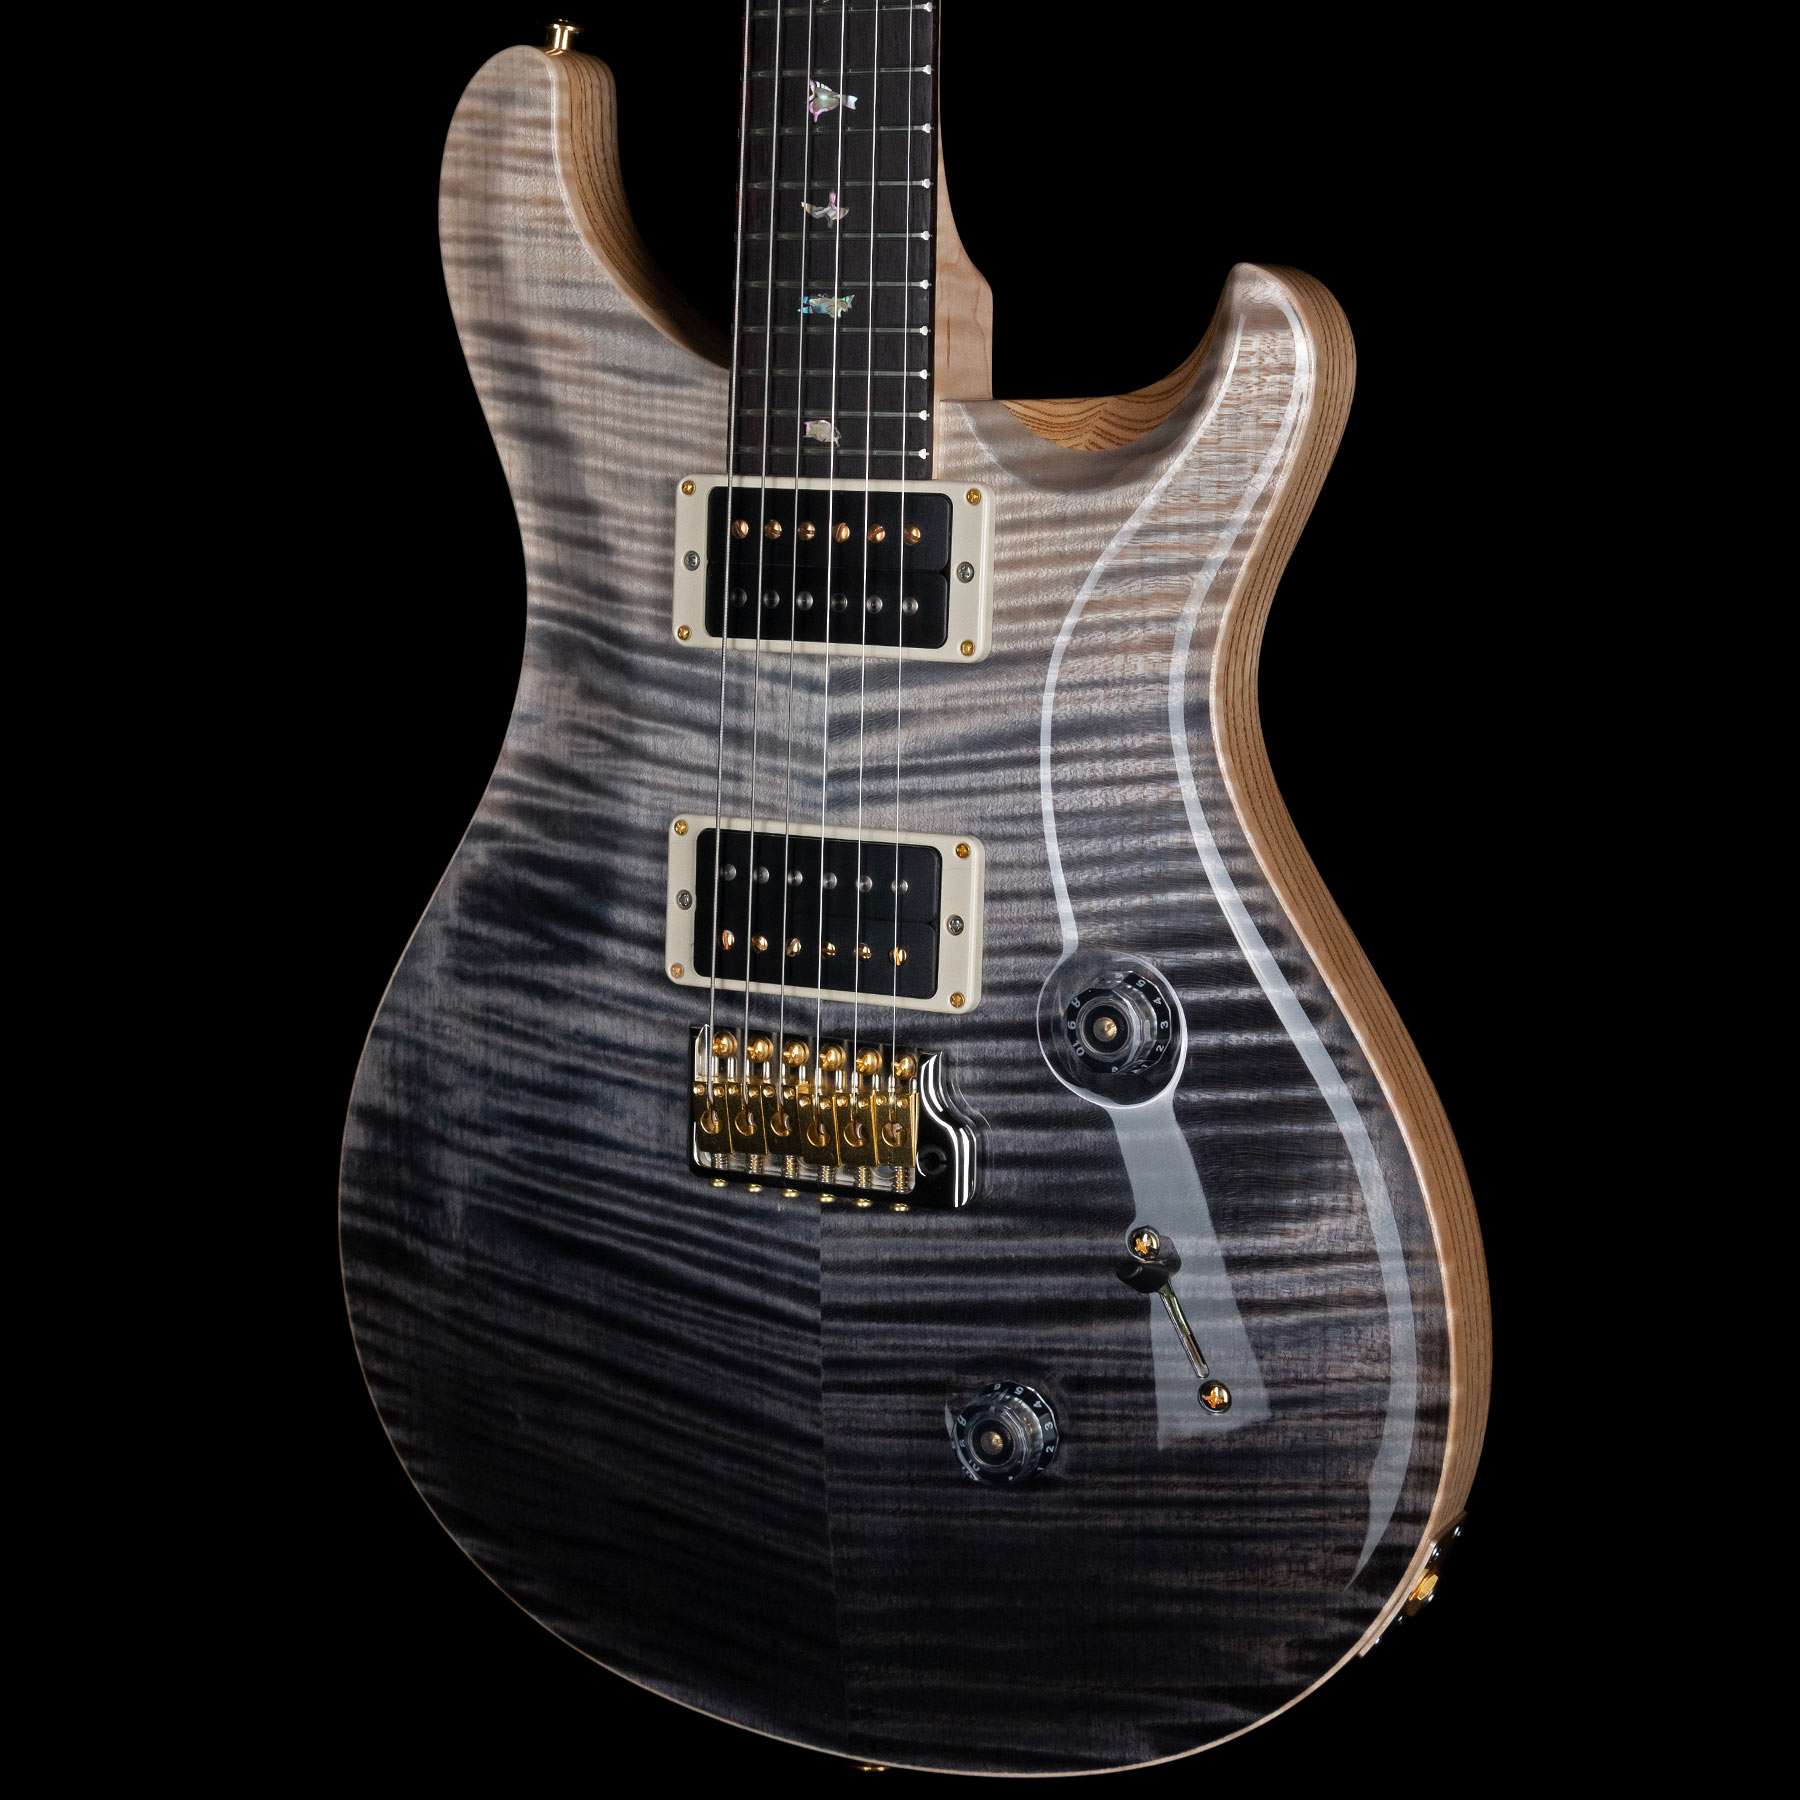 PRS Wood Library Custom 24 10 Top Swamp Ash Back Pattern Thin Flame Neck  Grey Black Fade